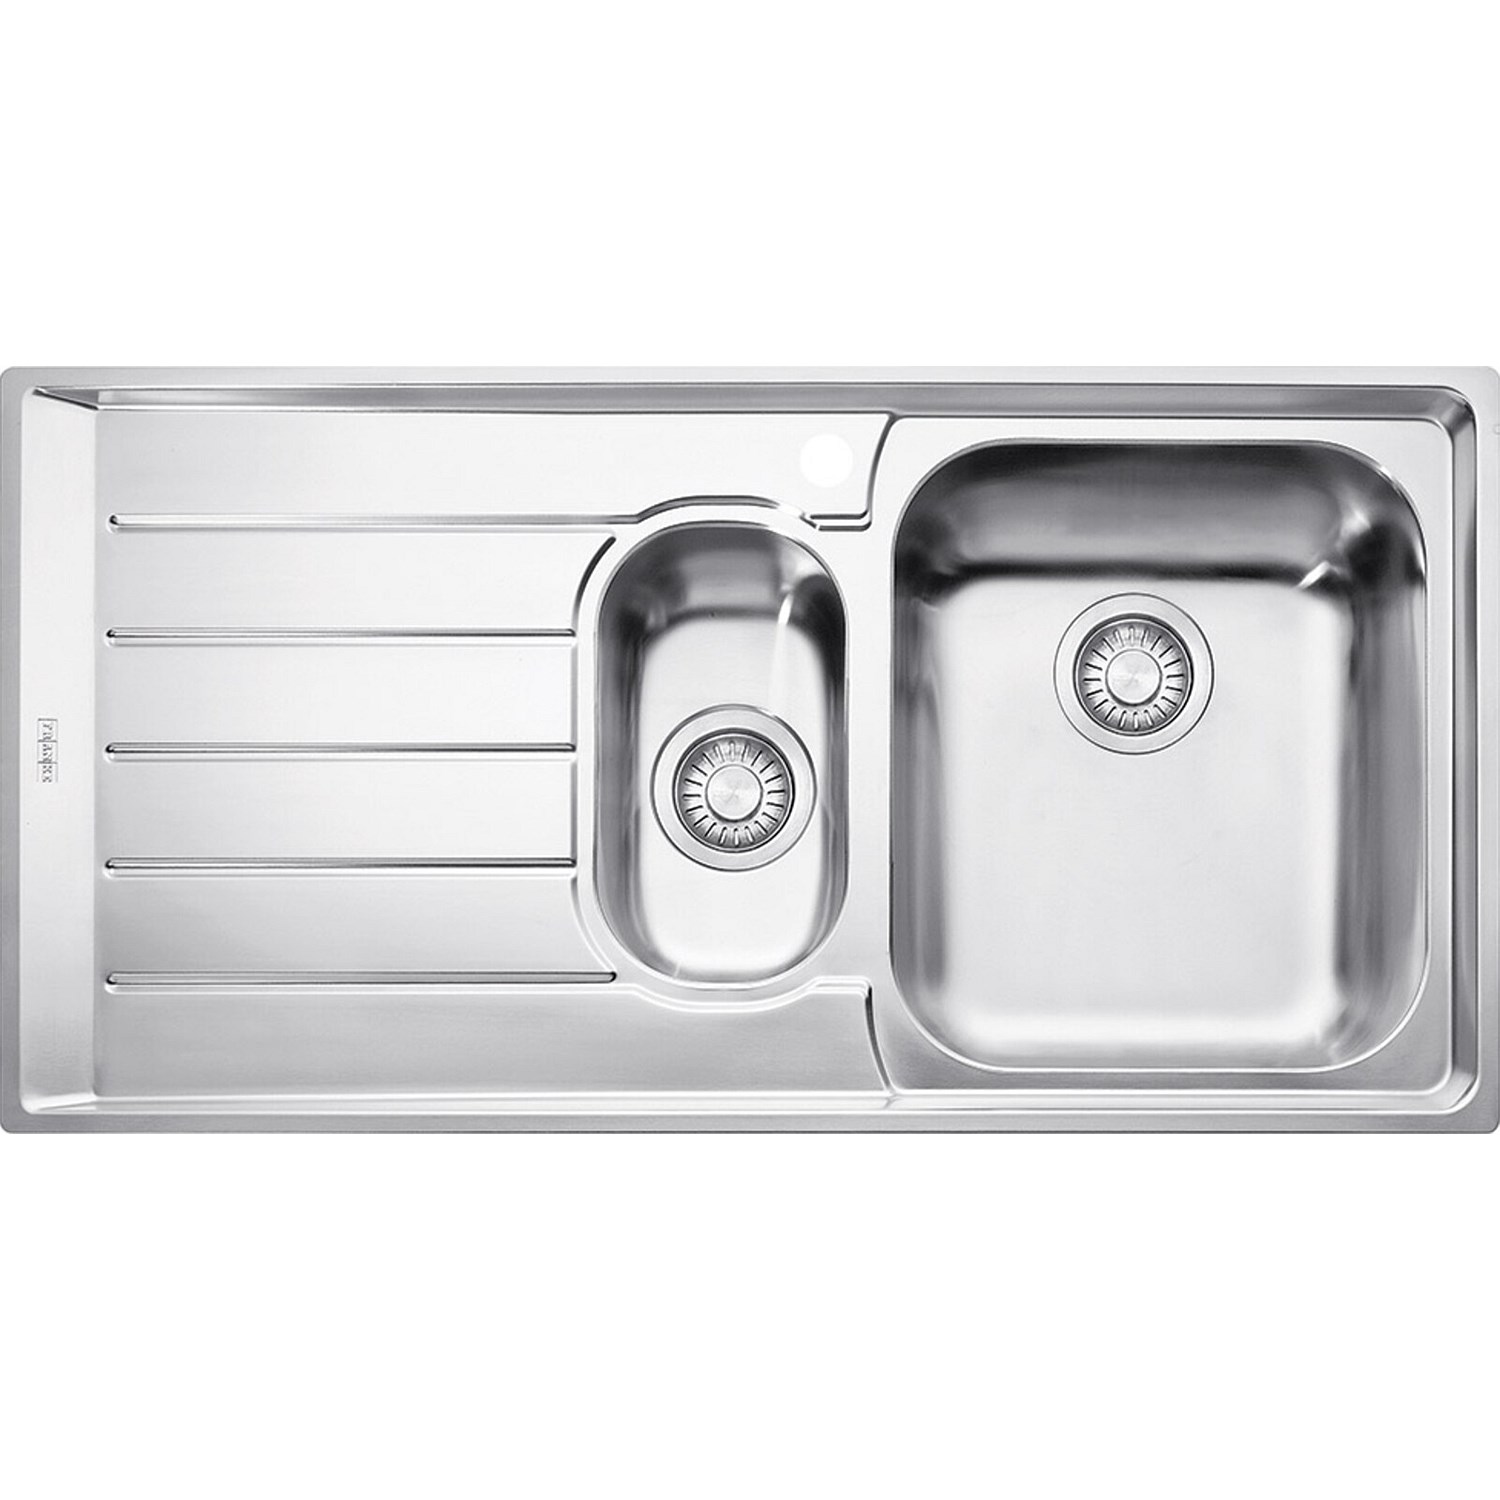 Sink Units - Franke Neptune 1 & 1/4 Bowl Sink with Drainer Topmount  Stainless